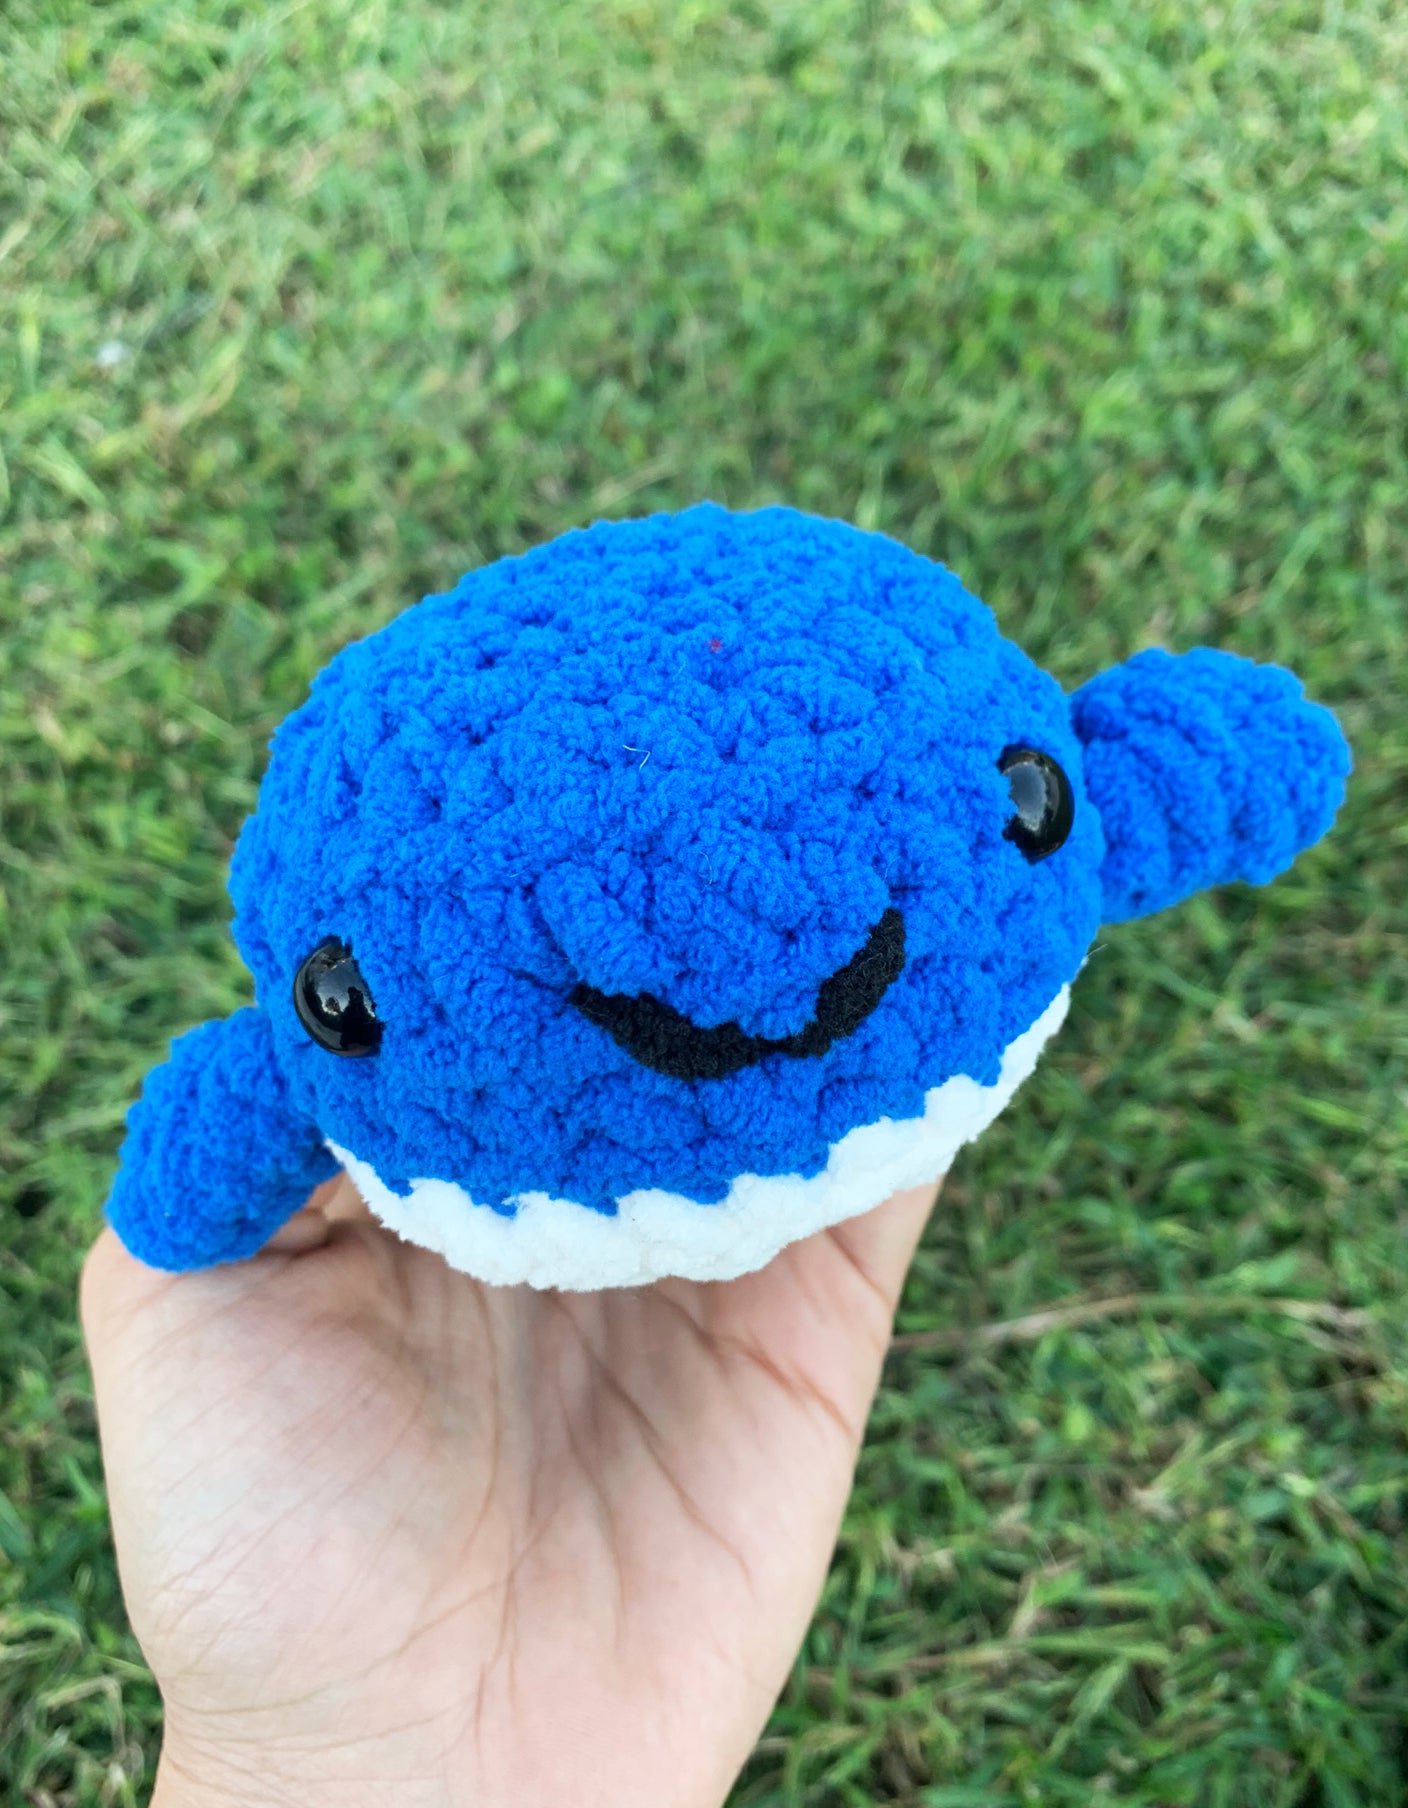 Whale hand-crocheted plushie